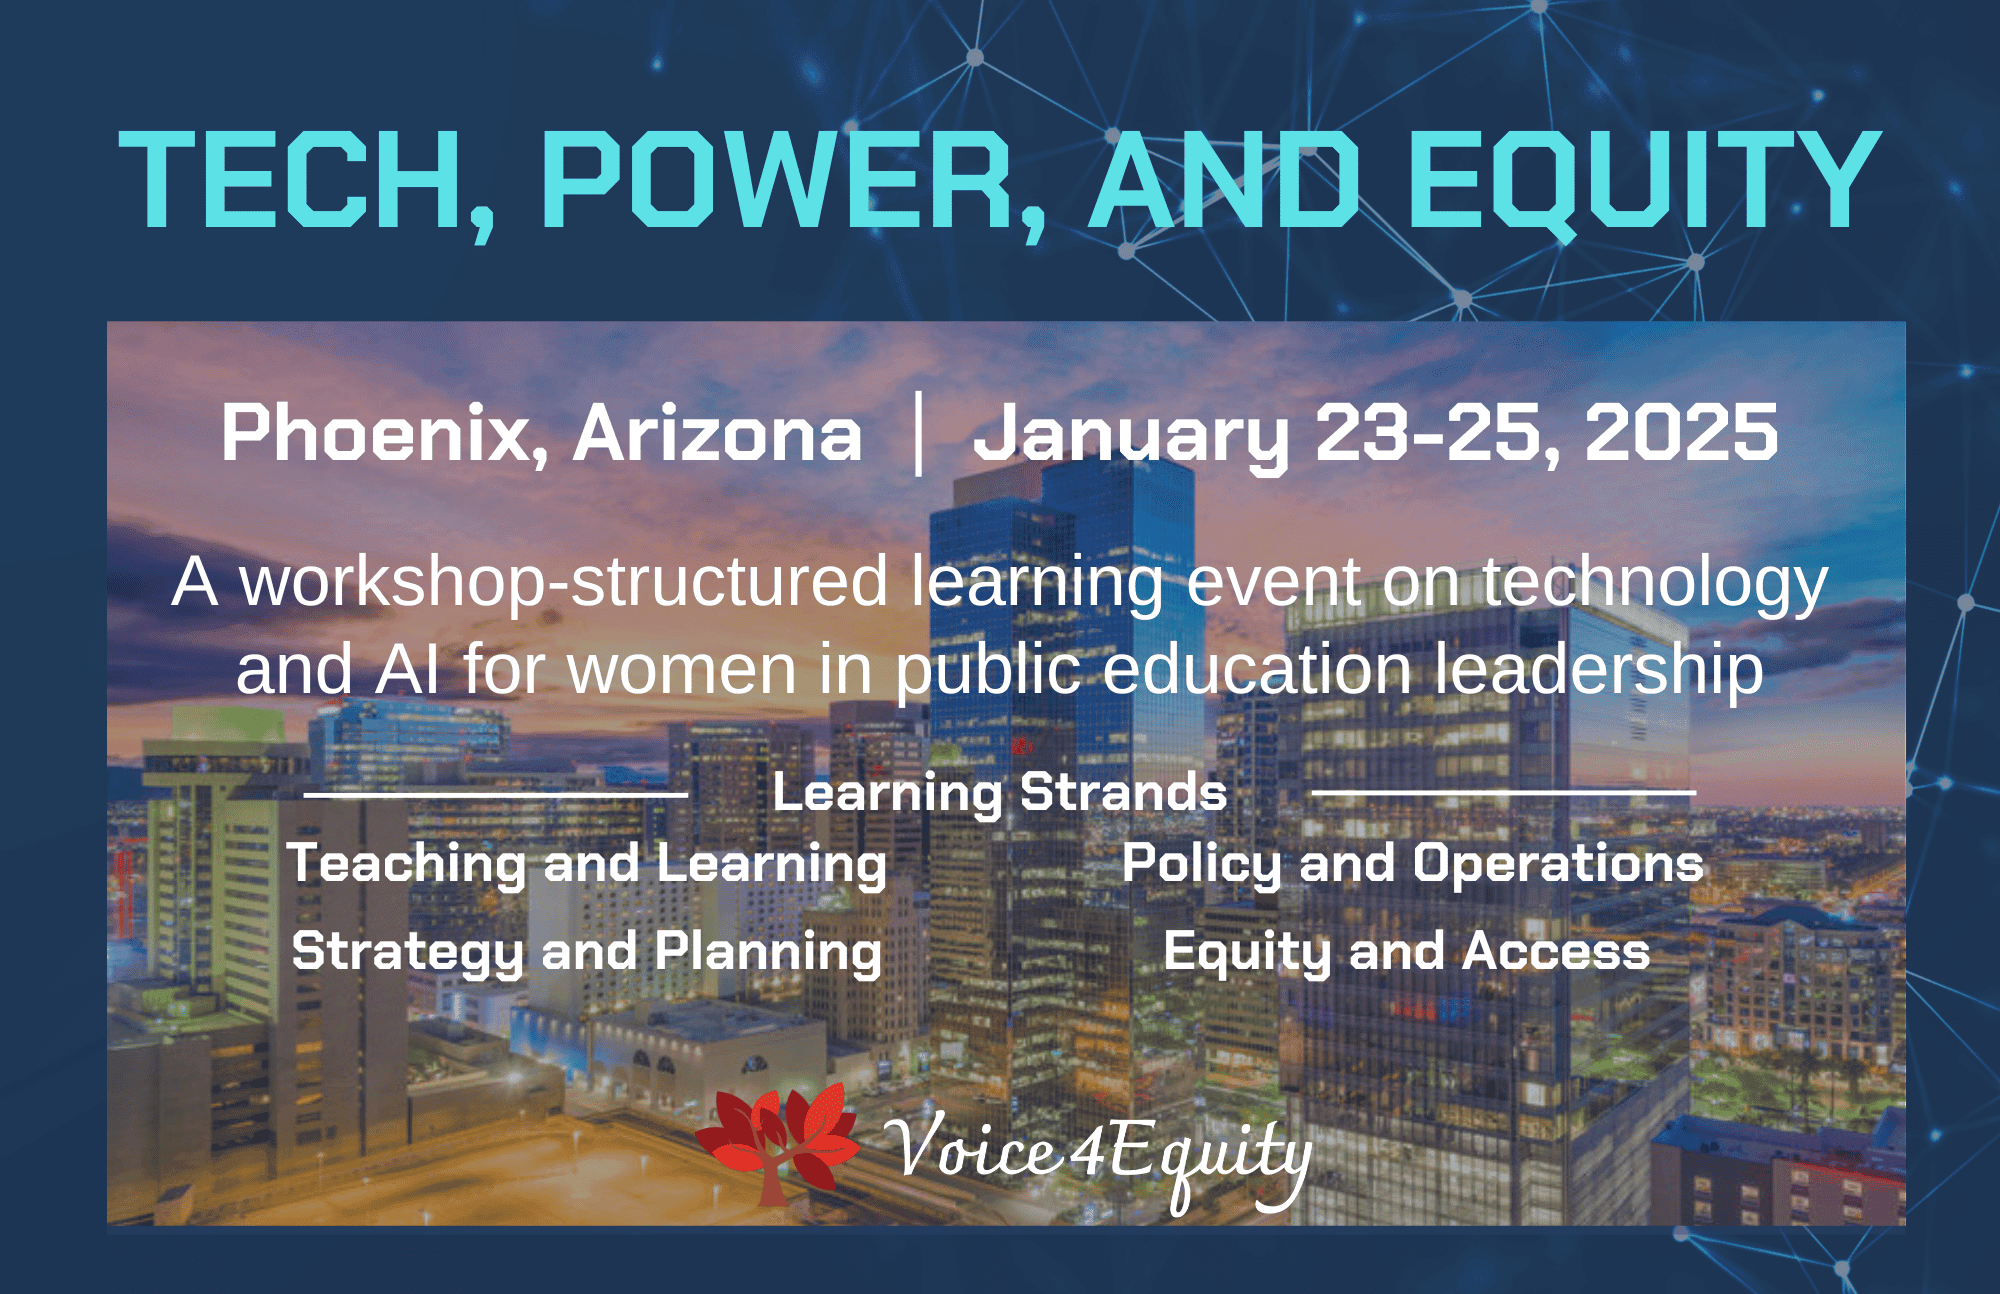 Voice4Equity Tech, Power, and Equity Event taking place in Phoenix, Arizona on January 23-25, 2025